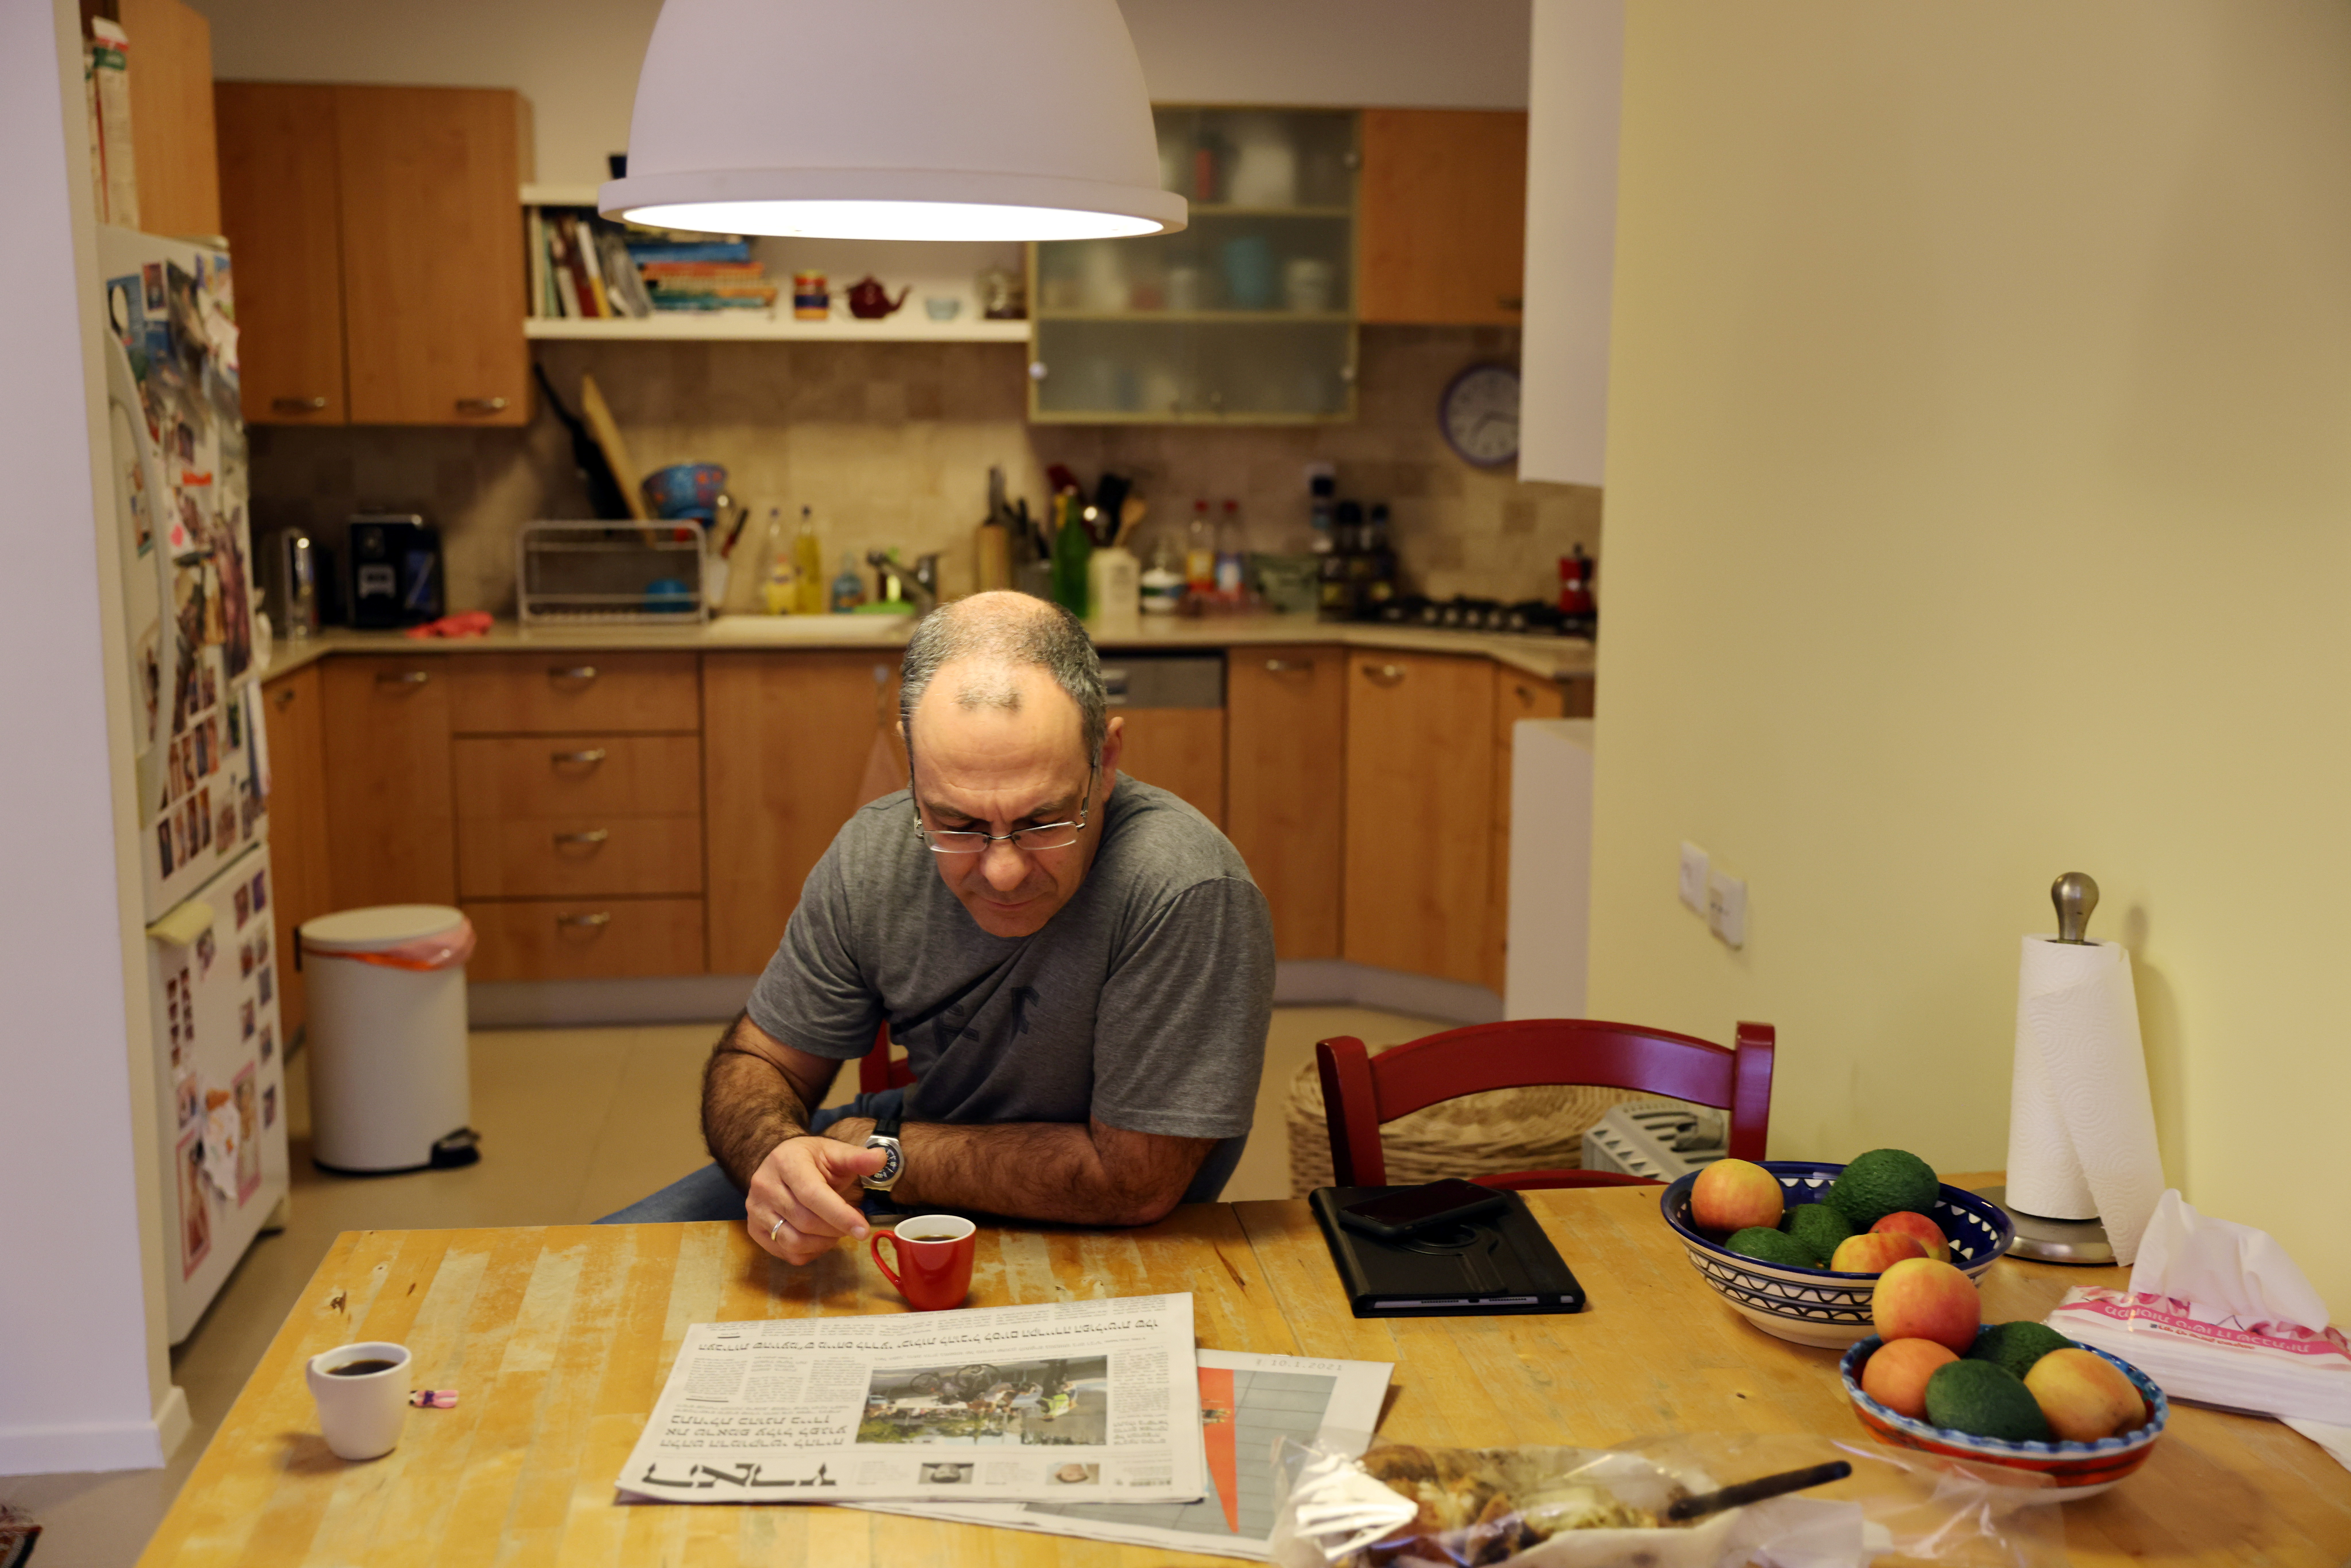 Doctor Guy Choshen drinks coffee at his home before heading to work as director of the COVID-19 ward in Ichilov Hospital in Tel Aviv